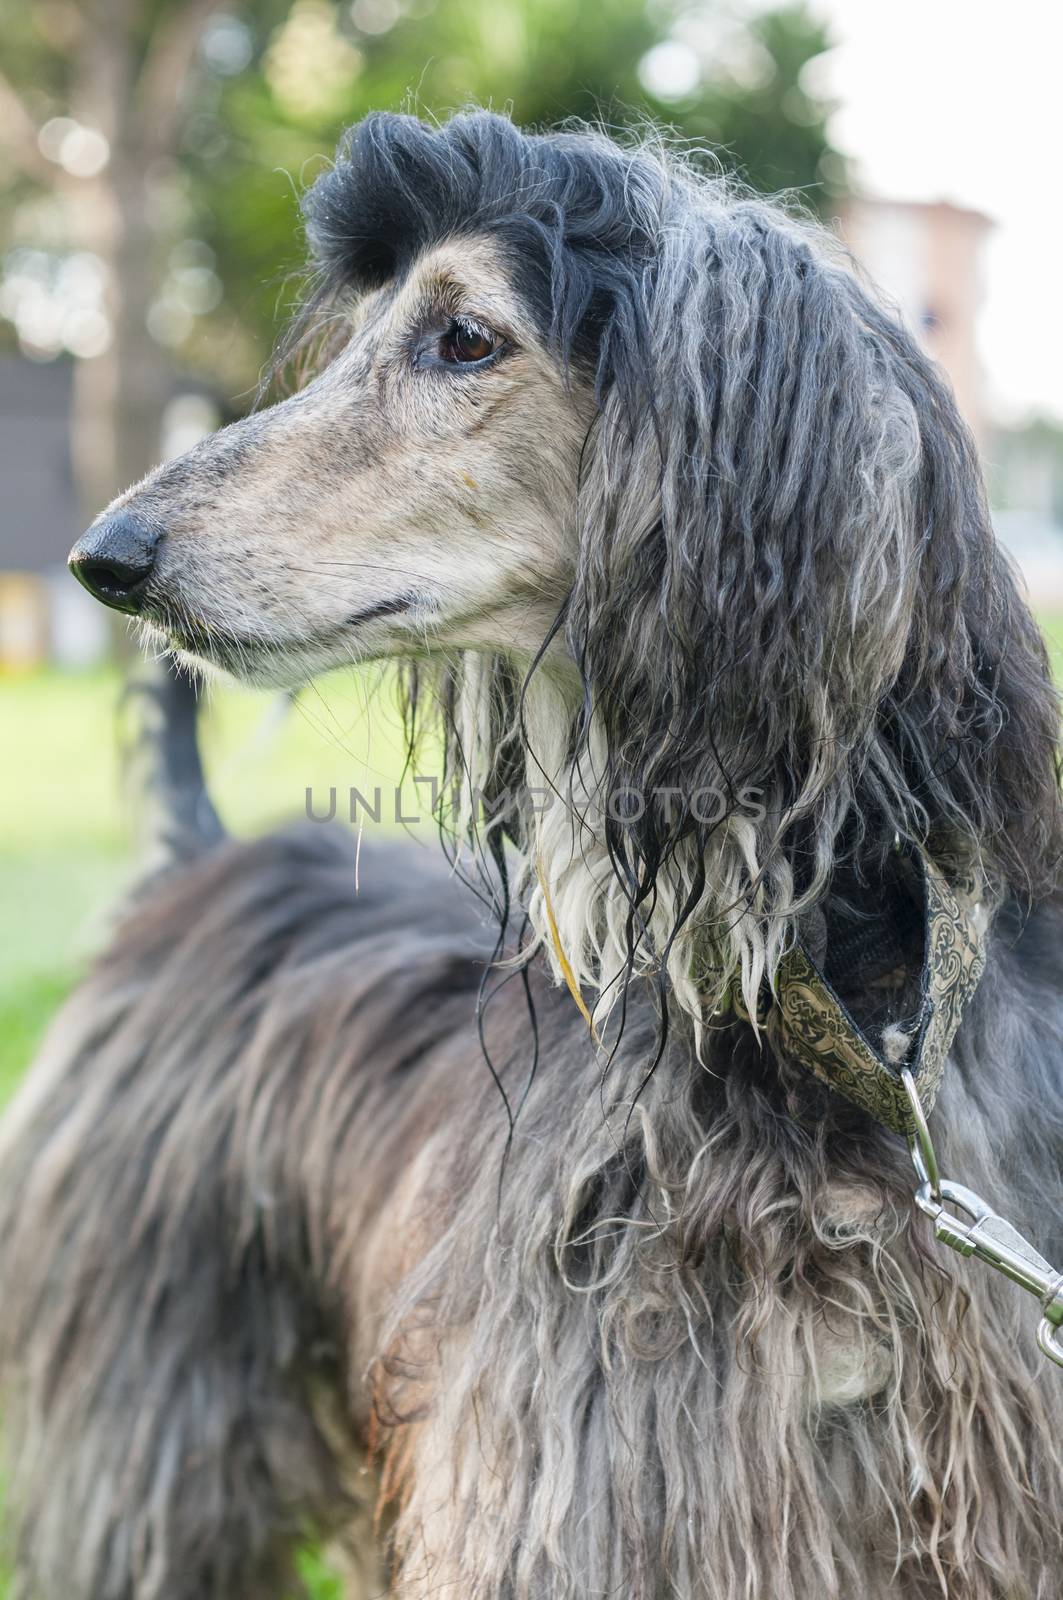 Afghan Hound, dog distinguished by its thick, fine, silky coat